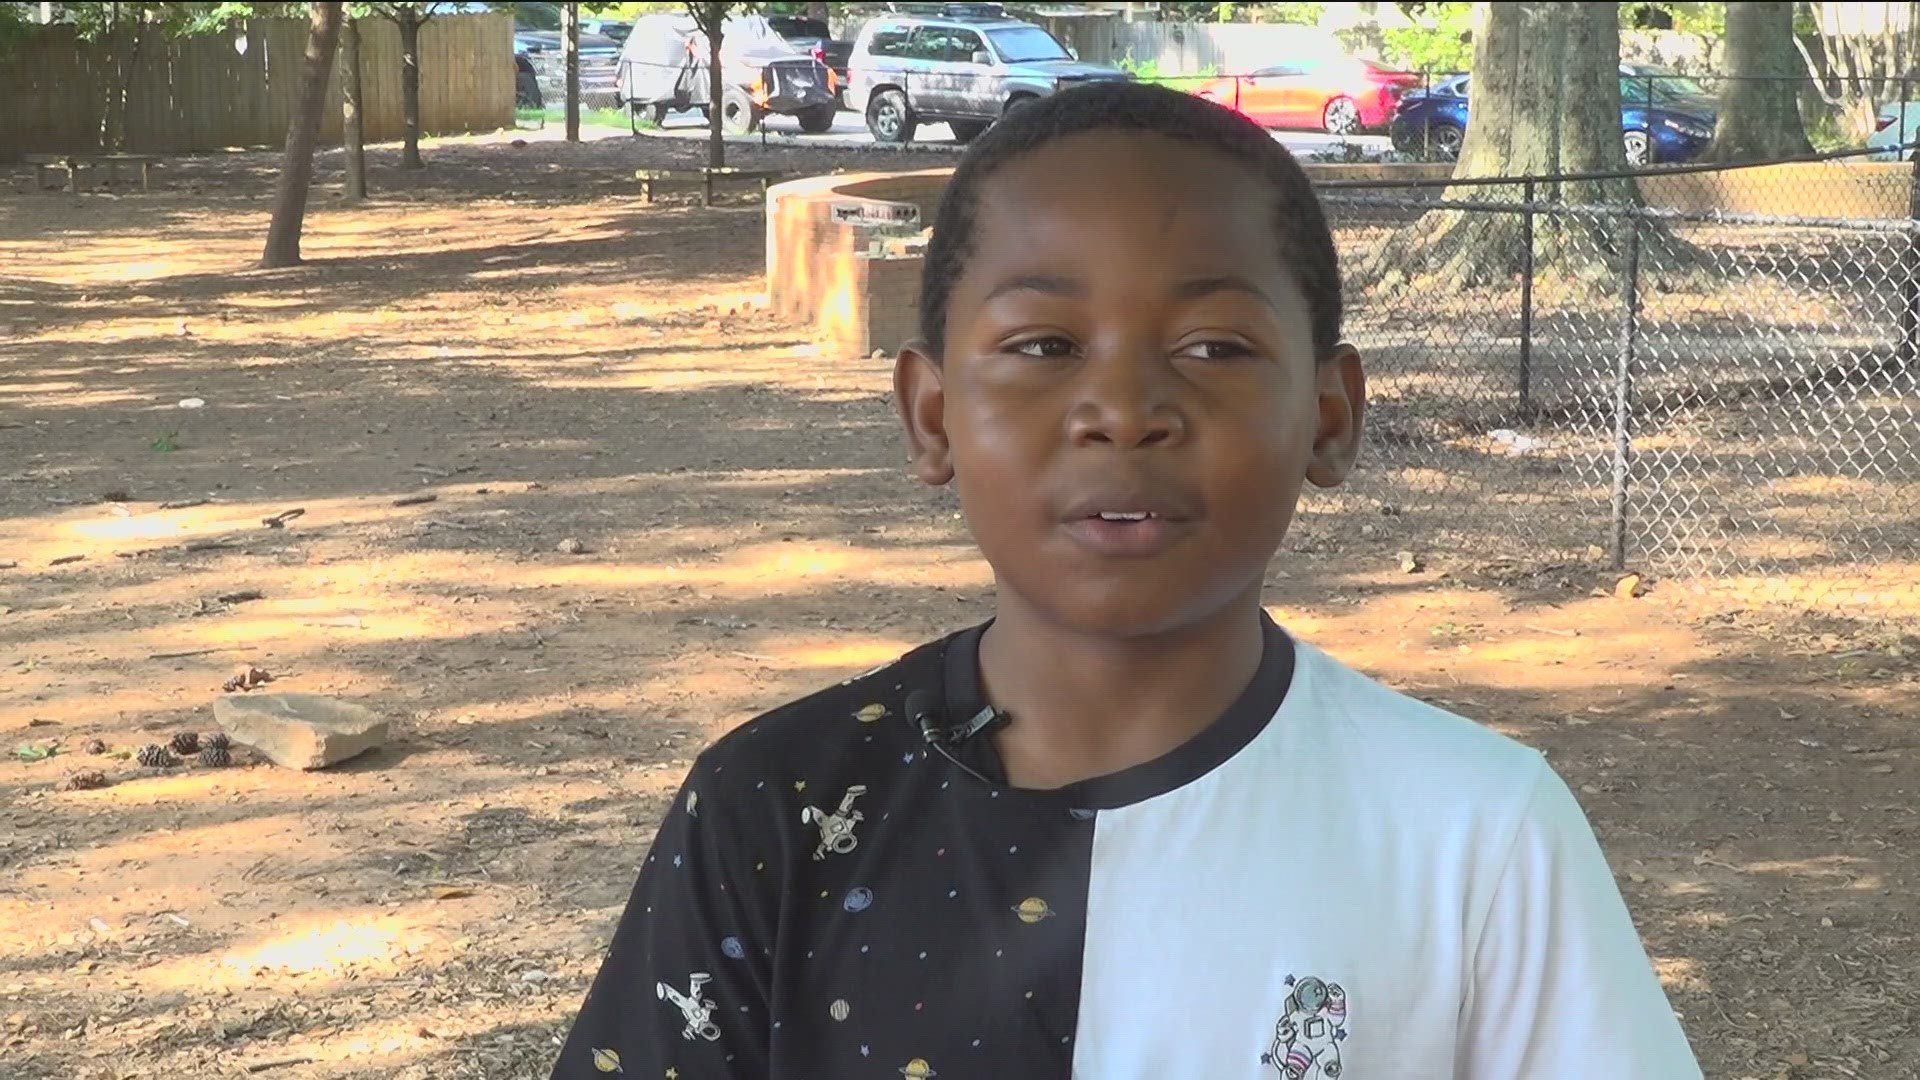 Chandler Gibson, 10, says he saved his friend's life after watching a video on YouTube.